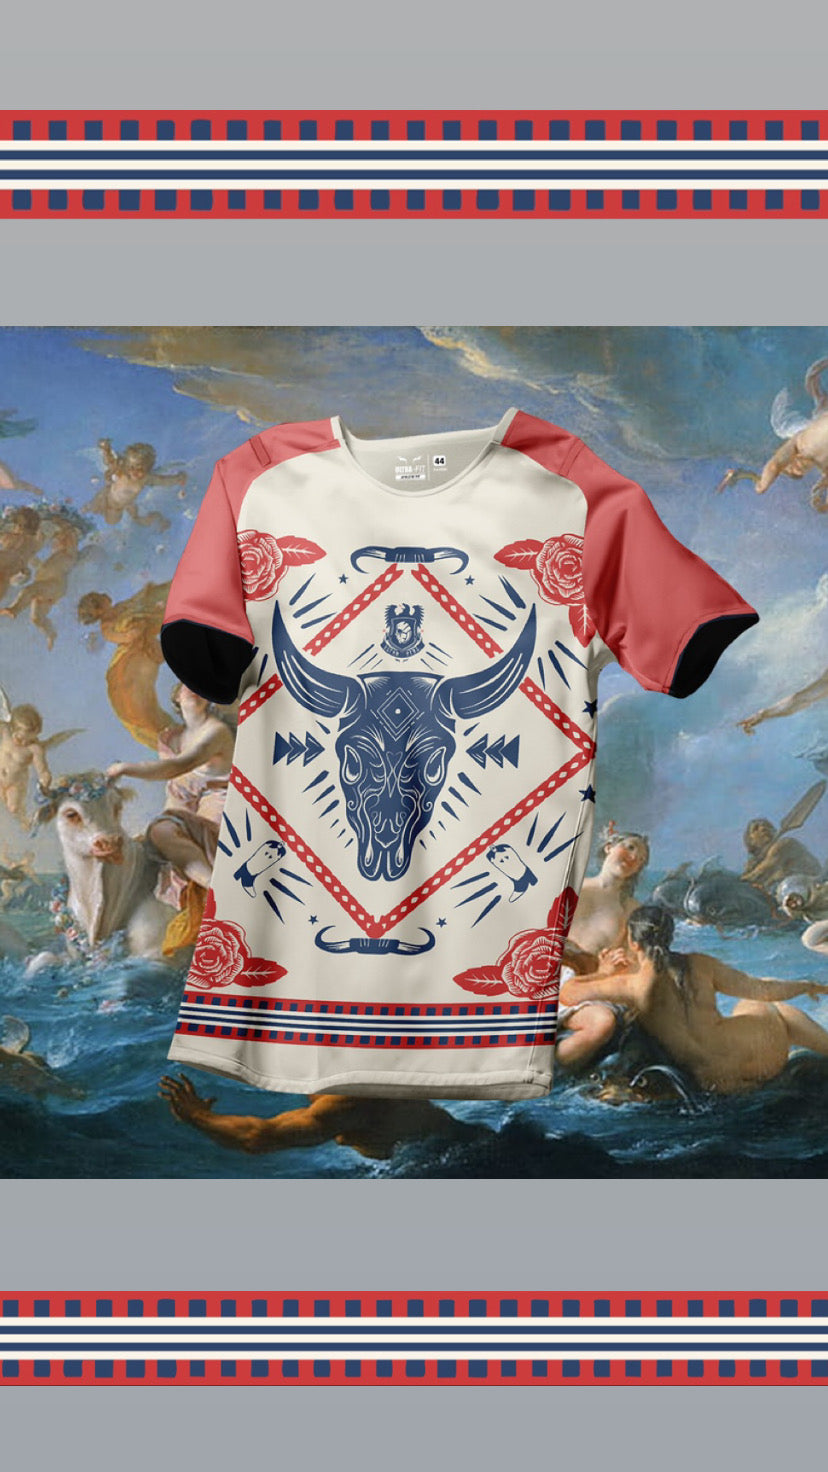 New Launch: Ultras Sacred Bulls Limited Edition Football Jersey